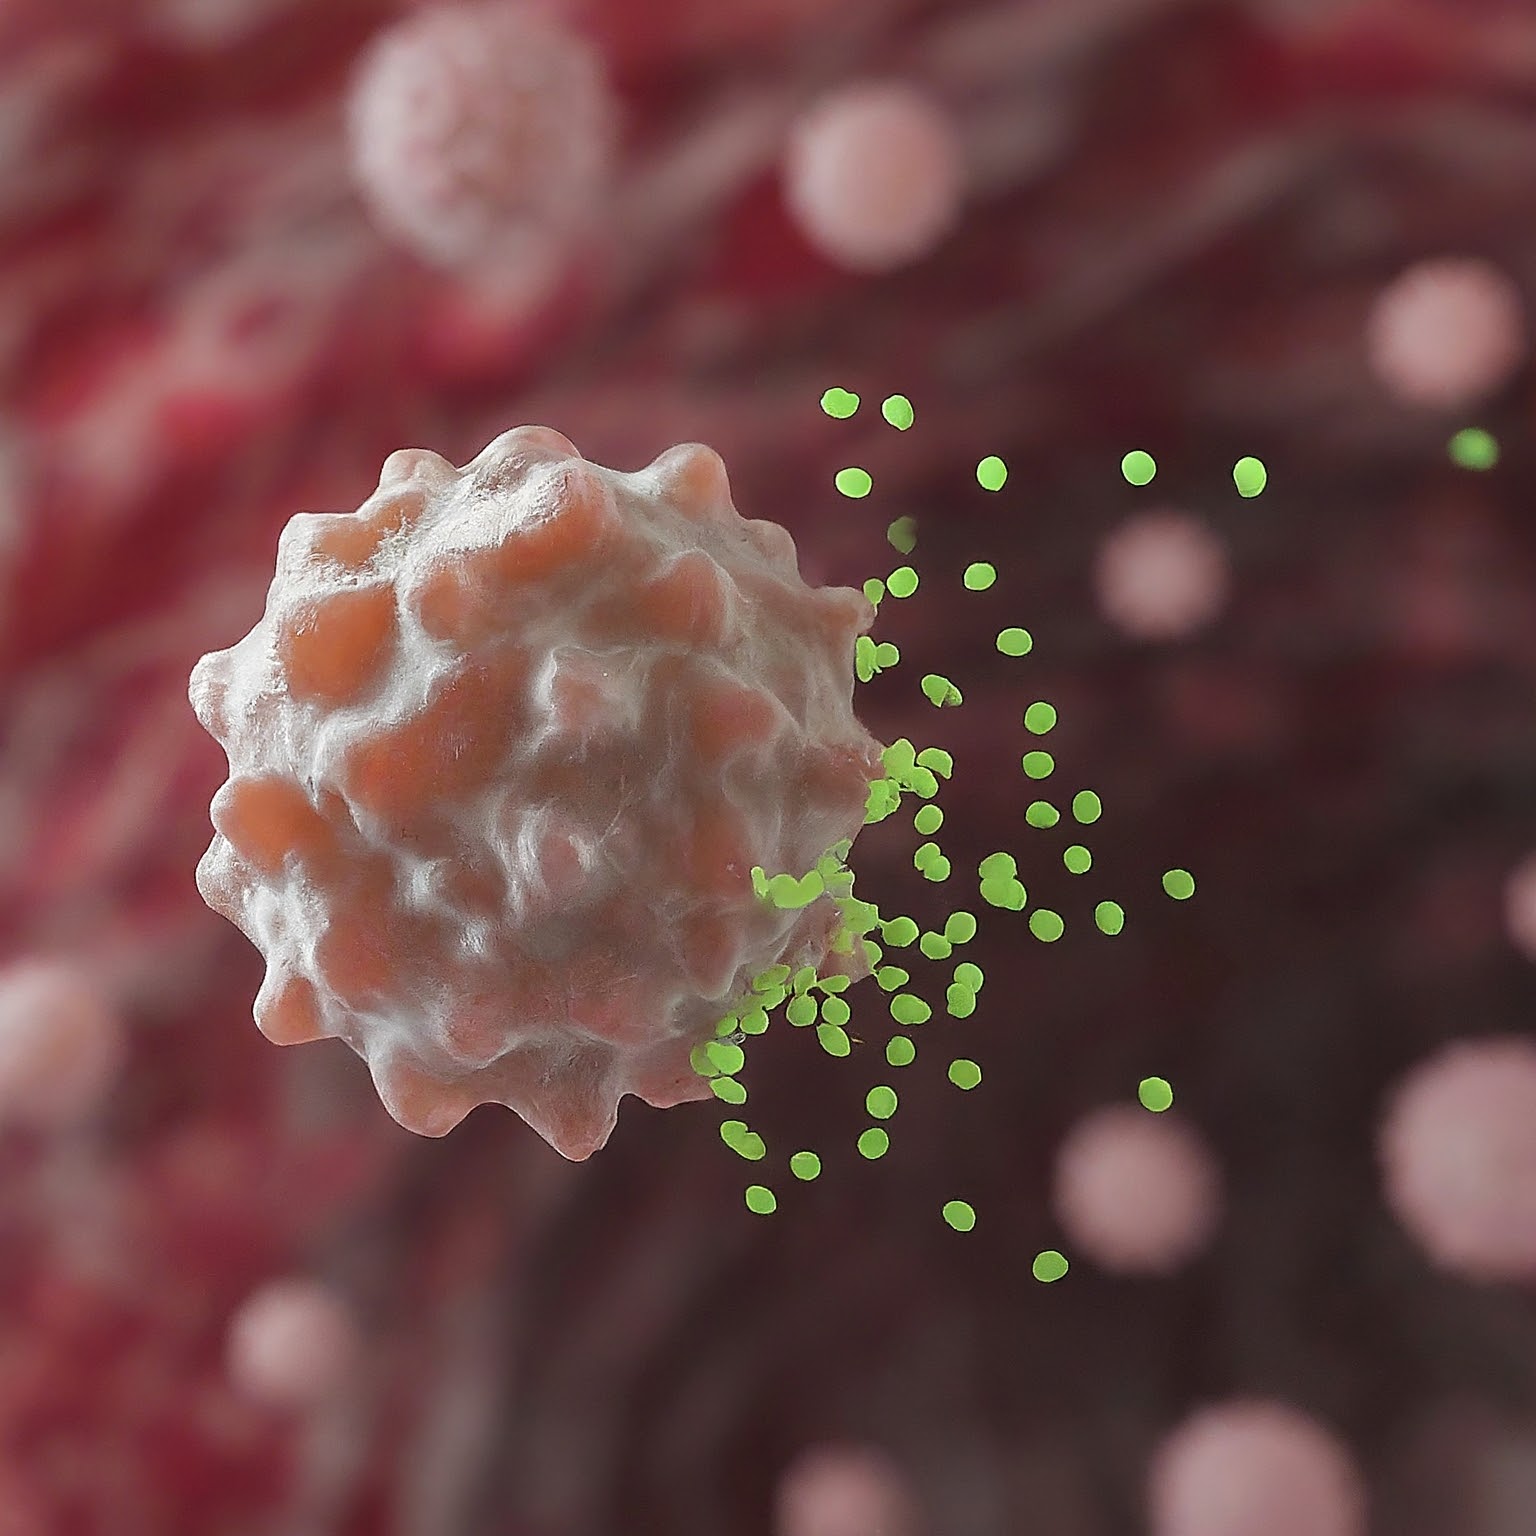 Microscopic close-up of a virus attacking a cell